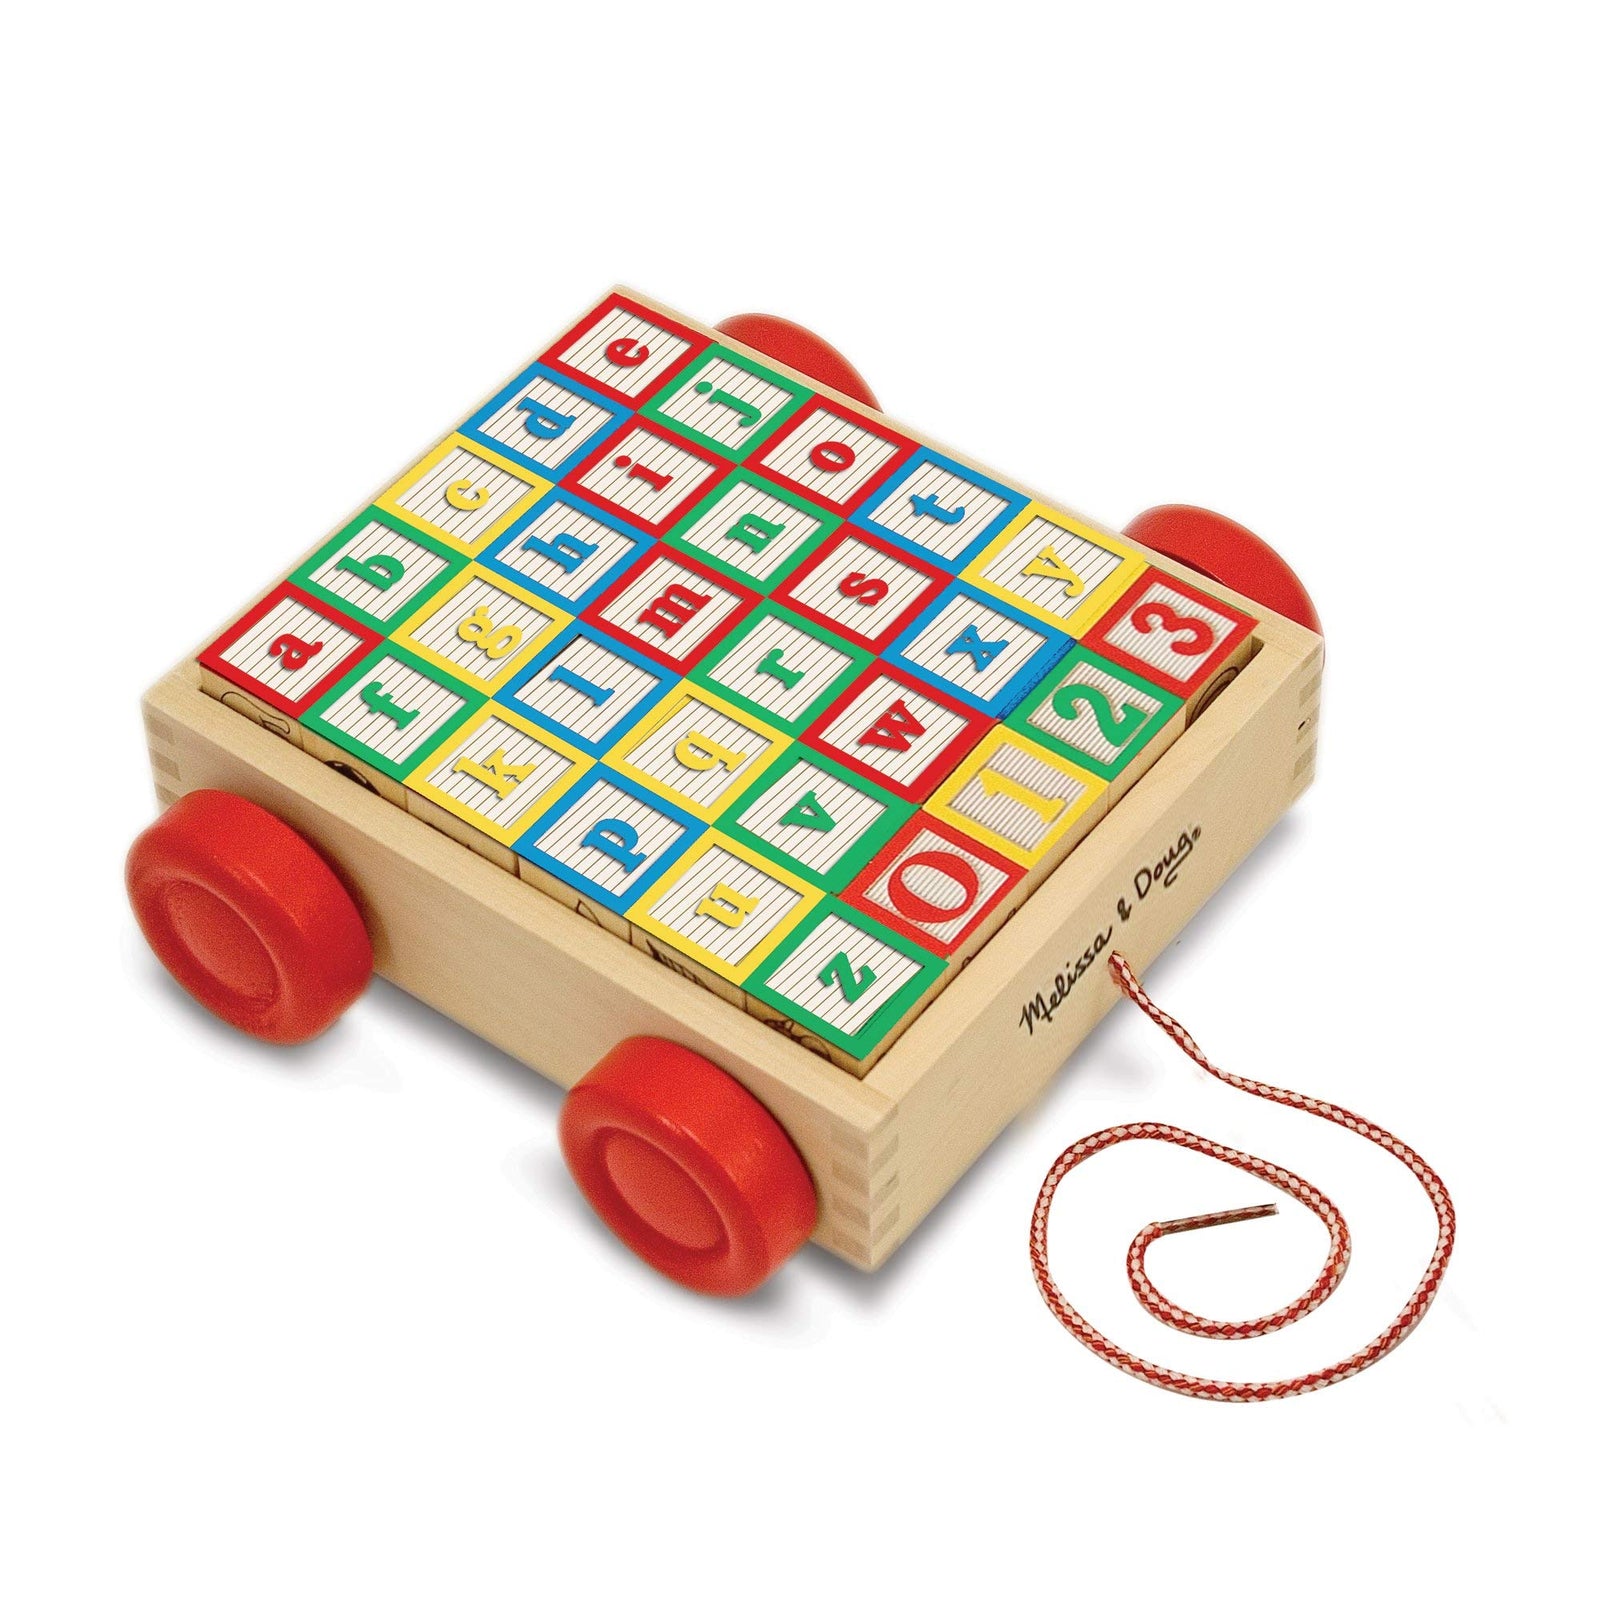 Melissa & Doug Classic ABC Wooden Block Cart Educational Toy With 30 1-Inch Solid Wood Blocks